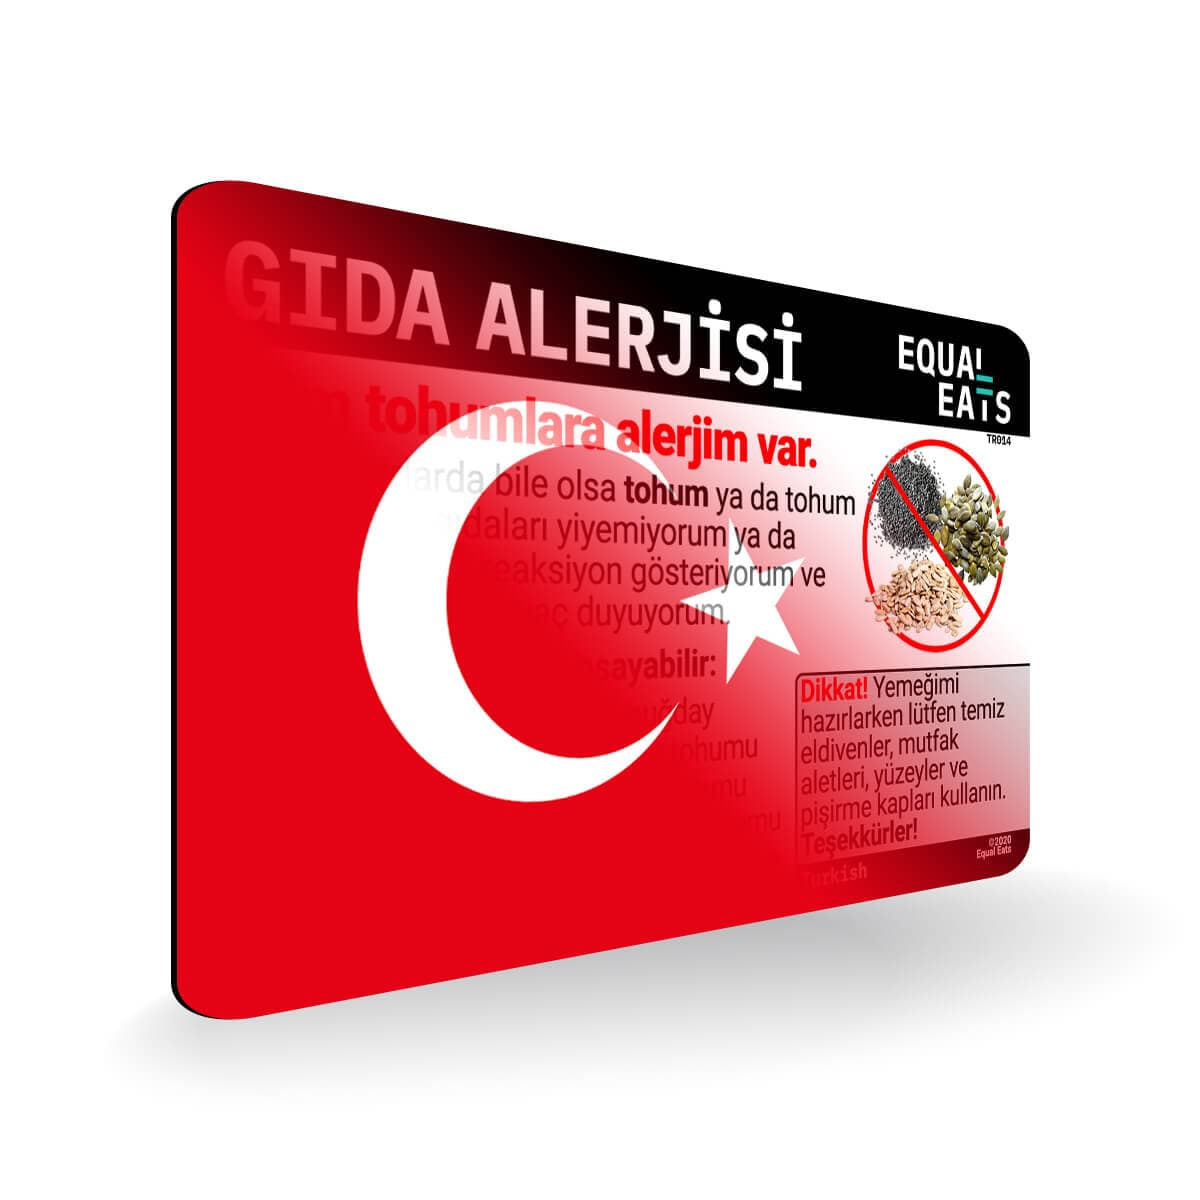 Seed Allergy in Turkish. Seed Allergy Card for Turkey